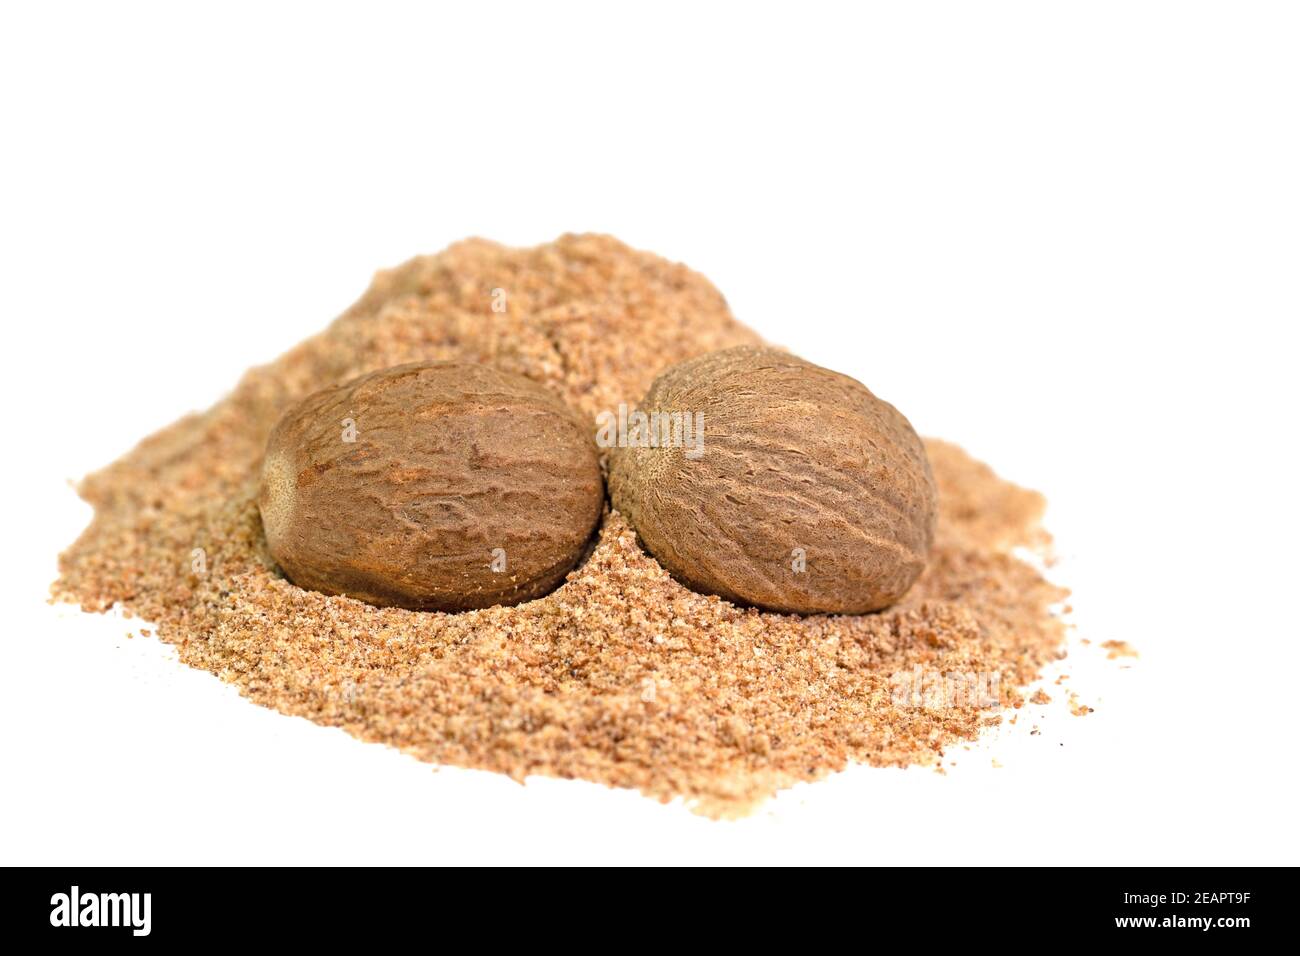 Nutmegs and powder isolated against a white background Stock Photo